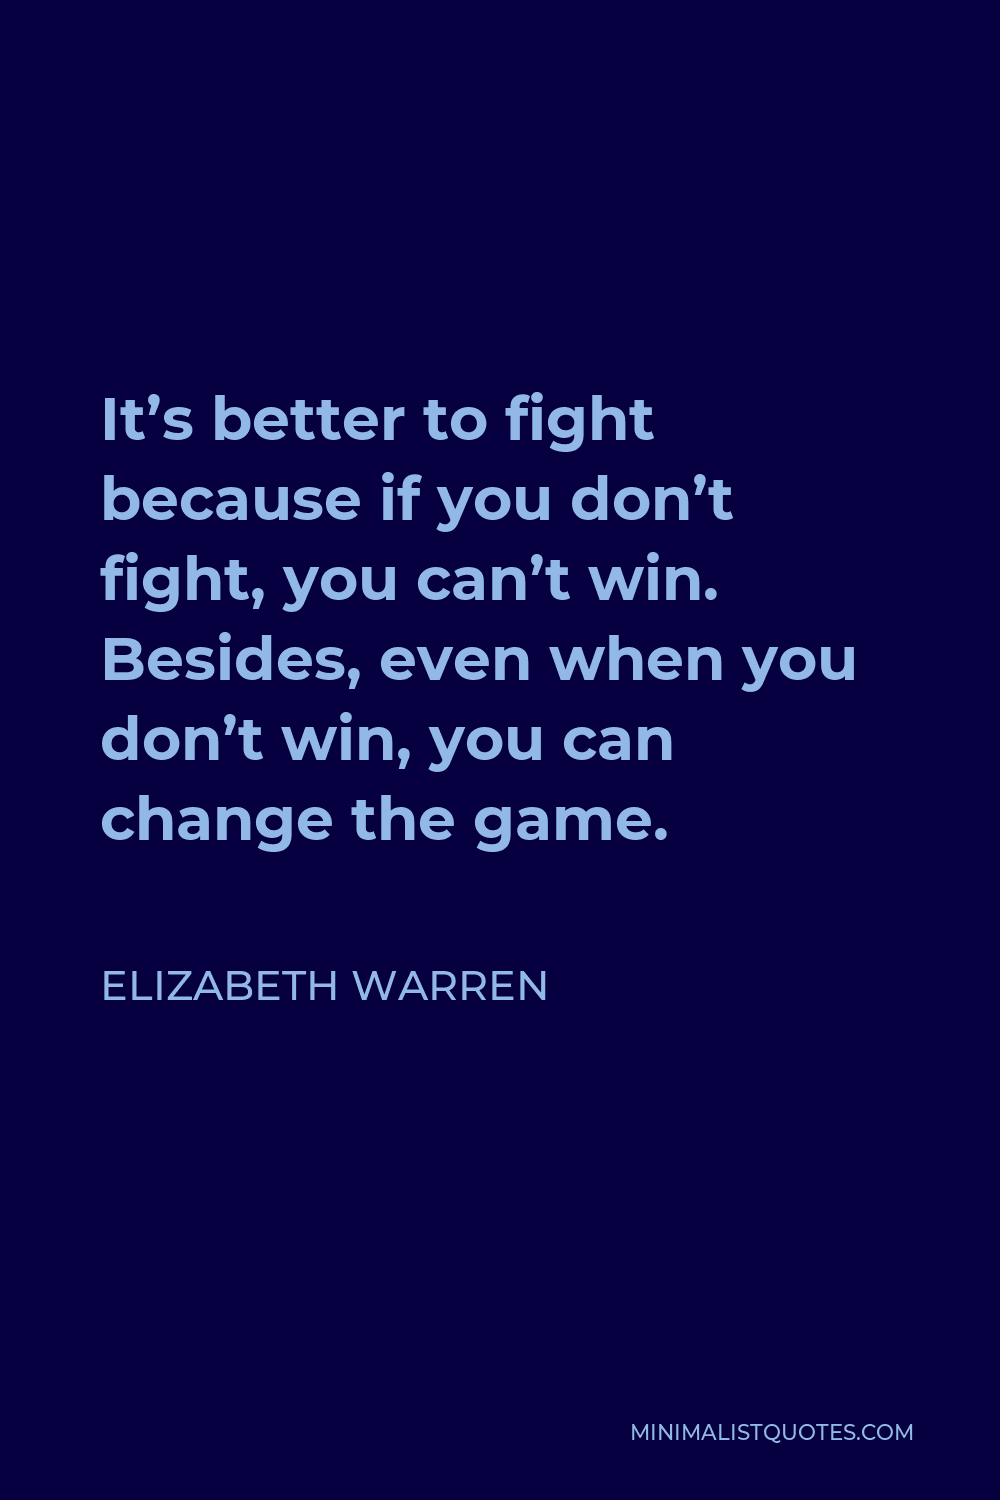 Elizabeth Warren Quote - It’s better to fight because if you don’t fight, you can’t win. Besides, even when you don’t win, you can change the game.